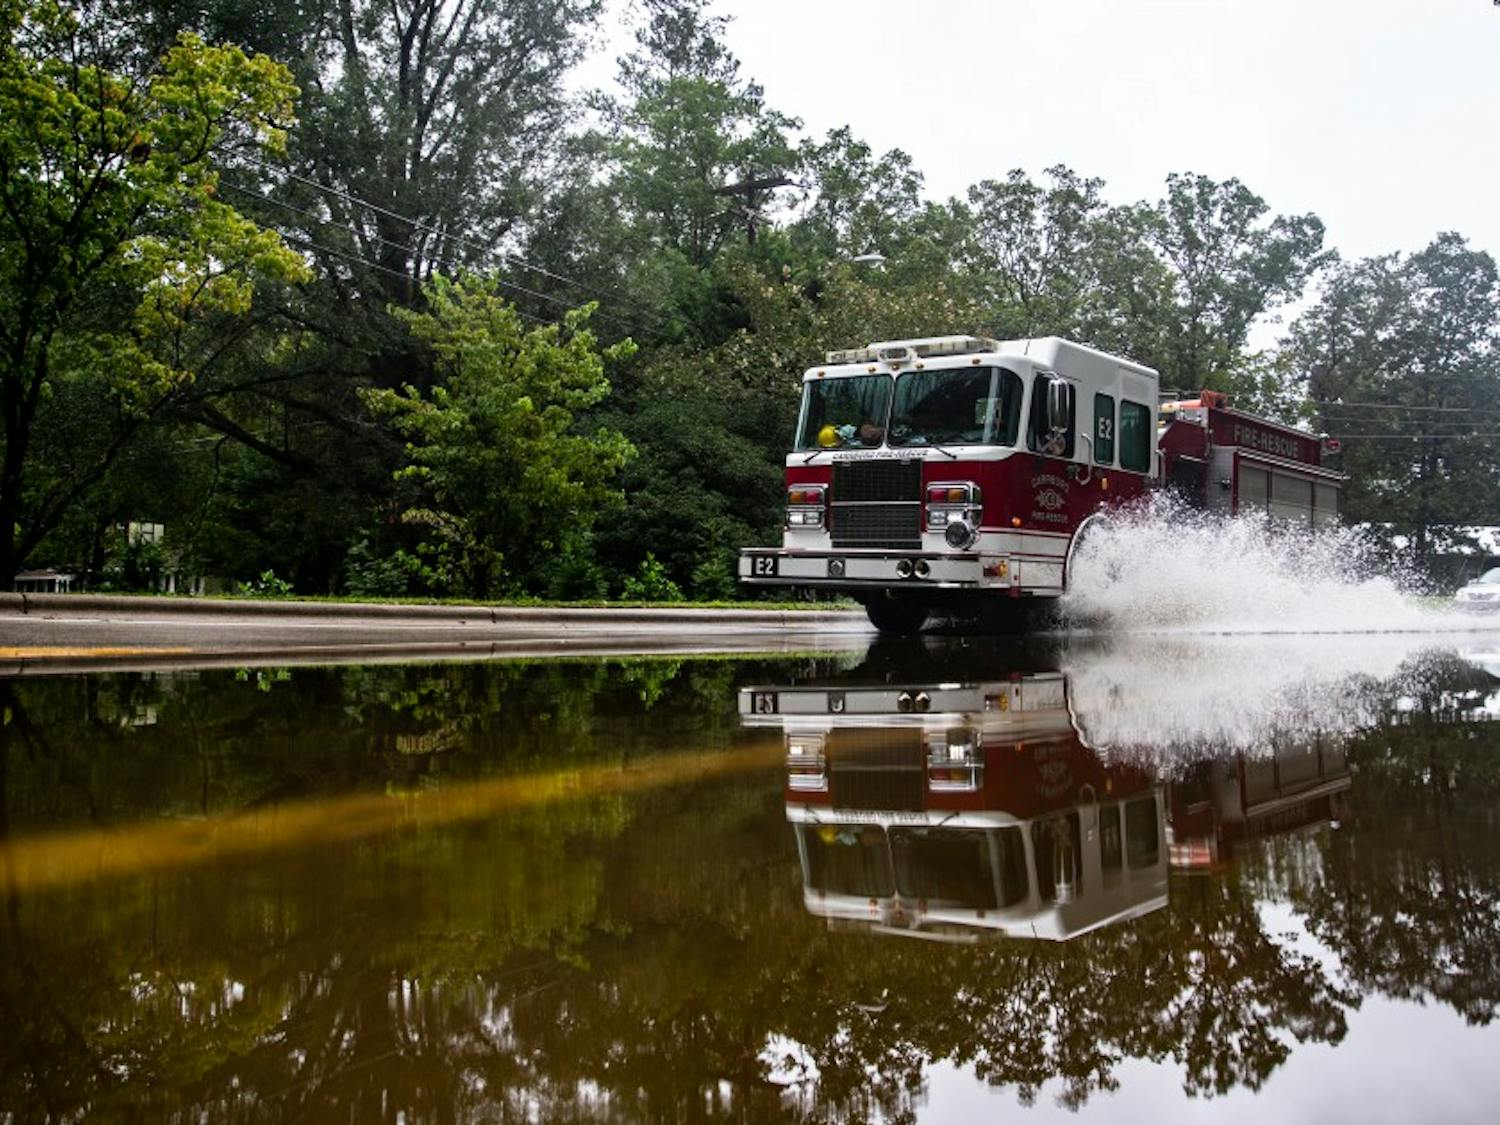 A Carrboro fire truck drives through a flooded section of North Greensboro Street on September 17, 2018. Parts of Carrboro and Chapel Hill experienced flash flooding after feeling minimal effects from Hurricane Florence in early September.&nbsp;